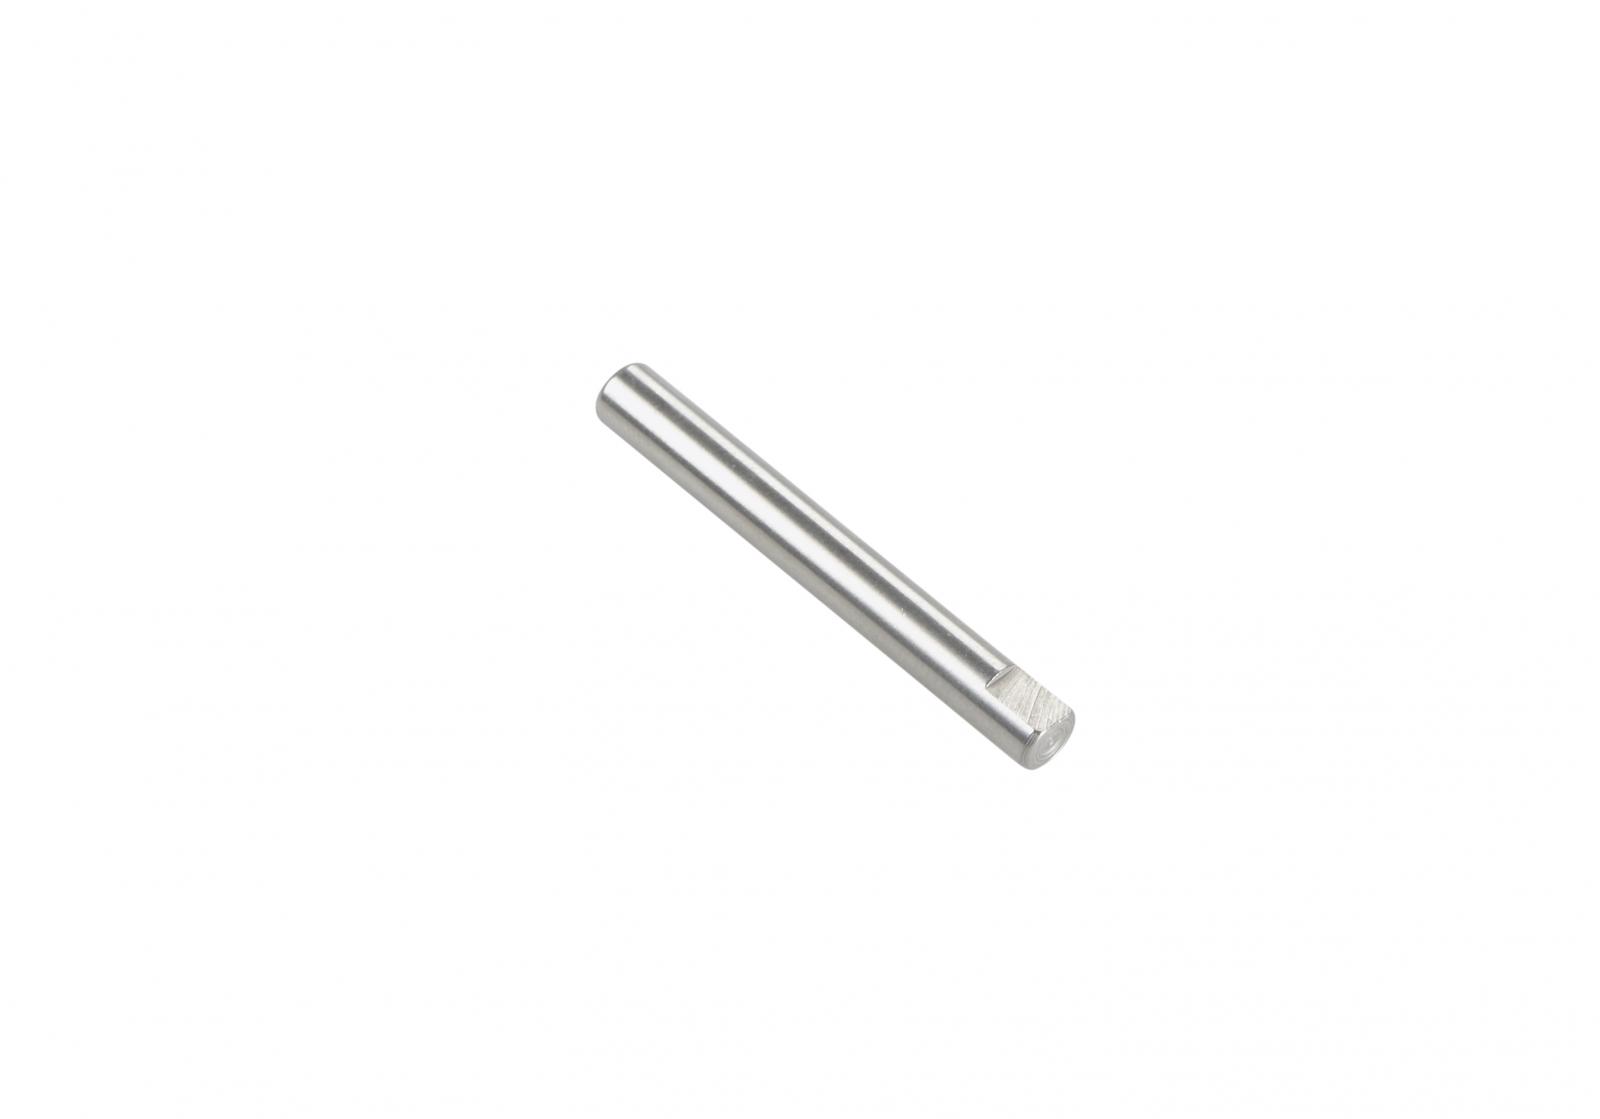 TapeTech® Swivel Coupling Pin. Part number 150004F